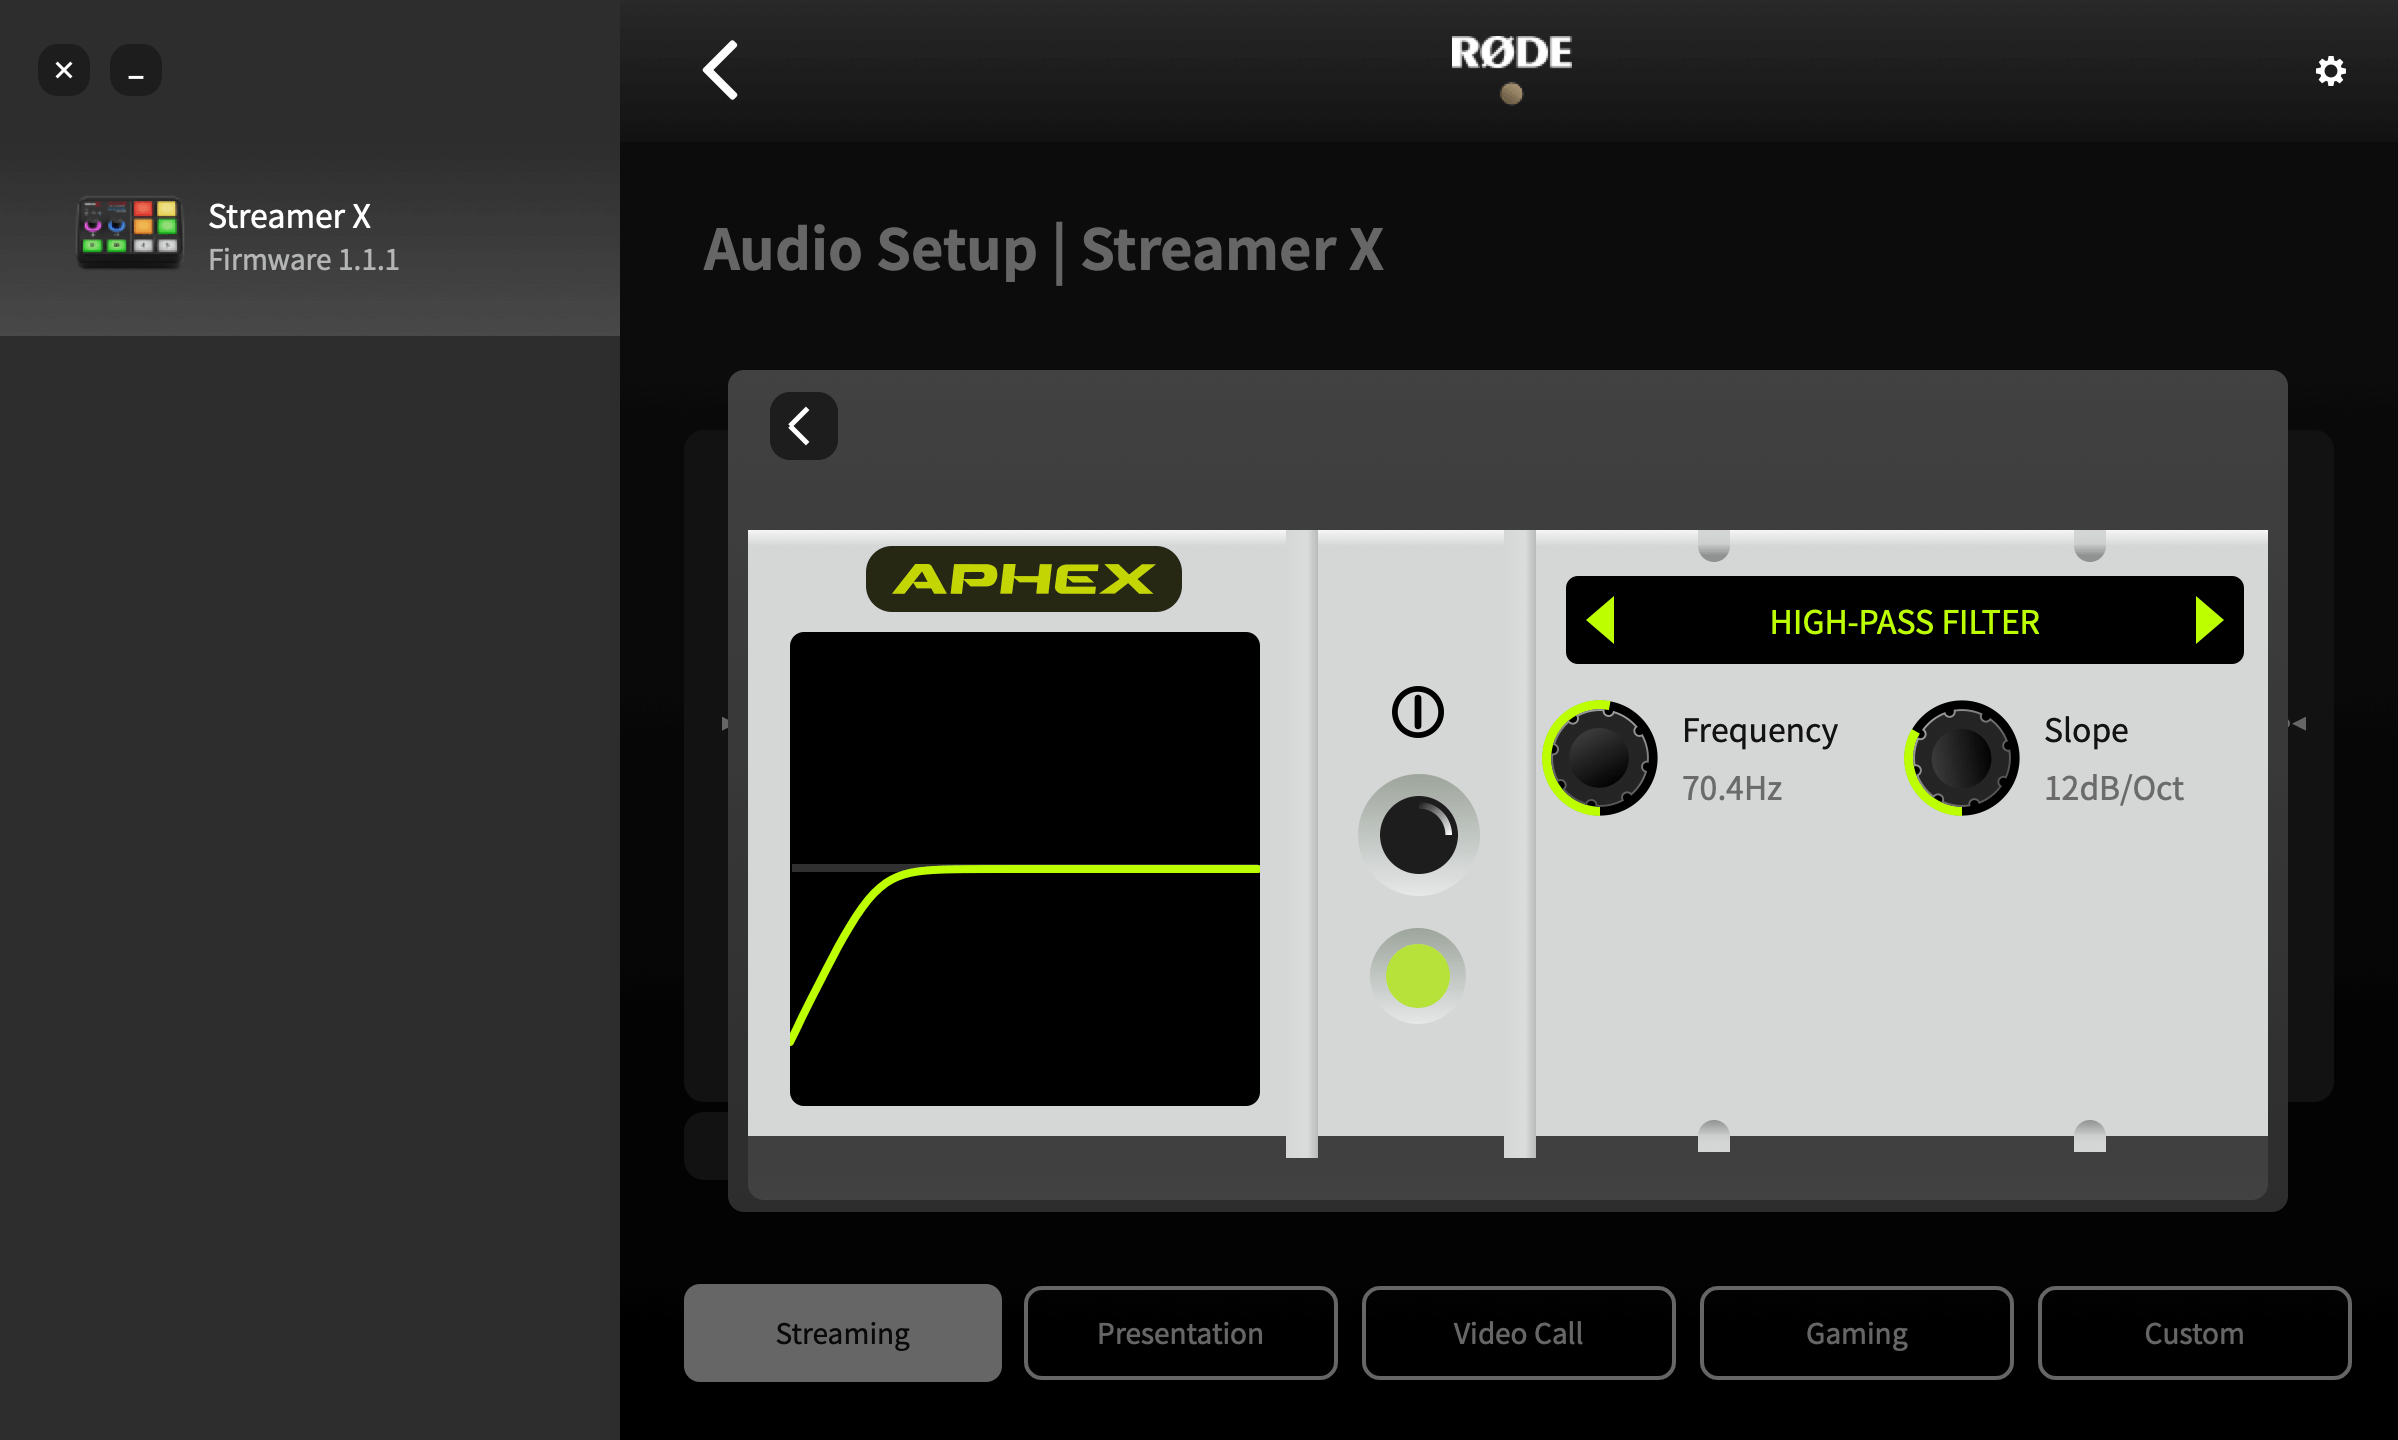 RØDE Central showing Streamer X high-pass filter settings